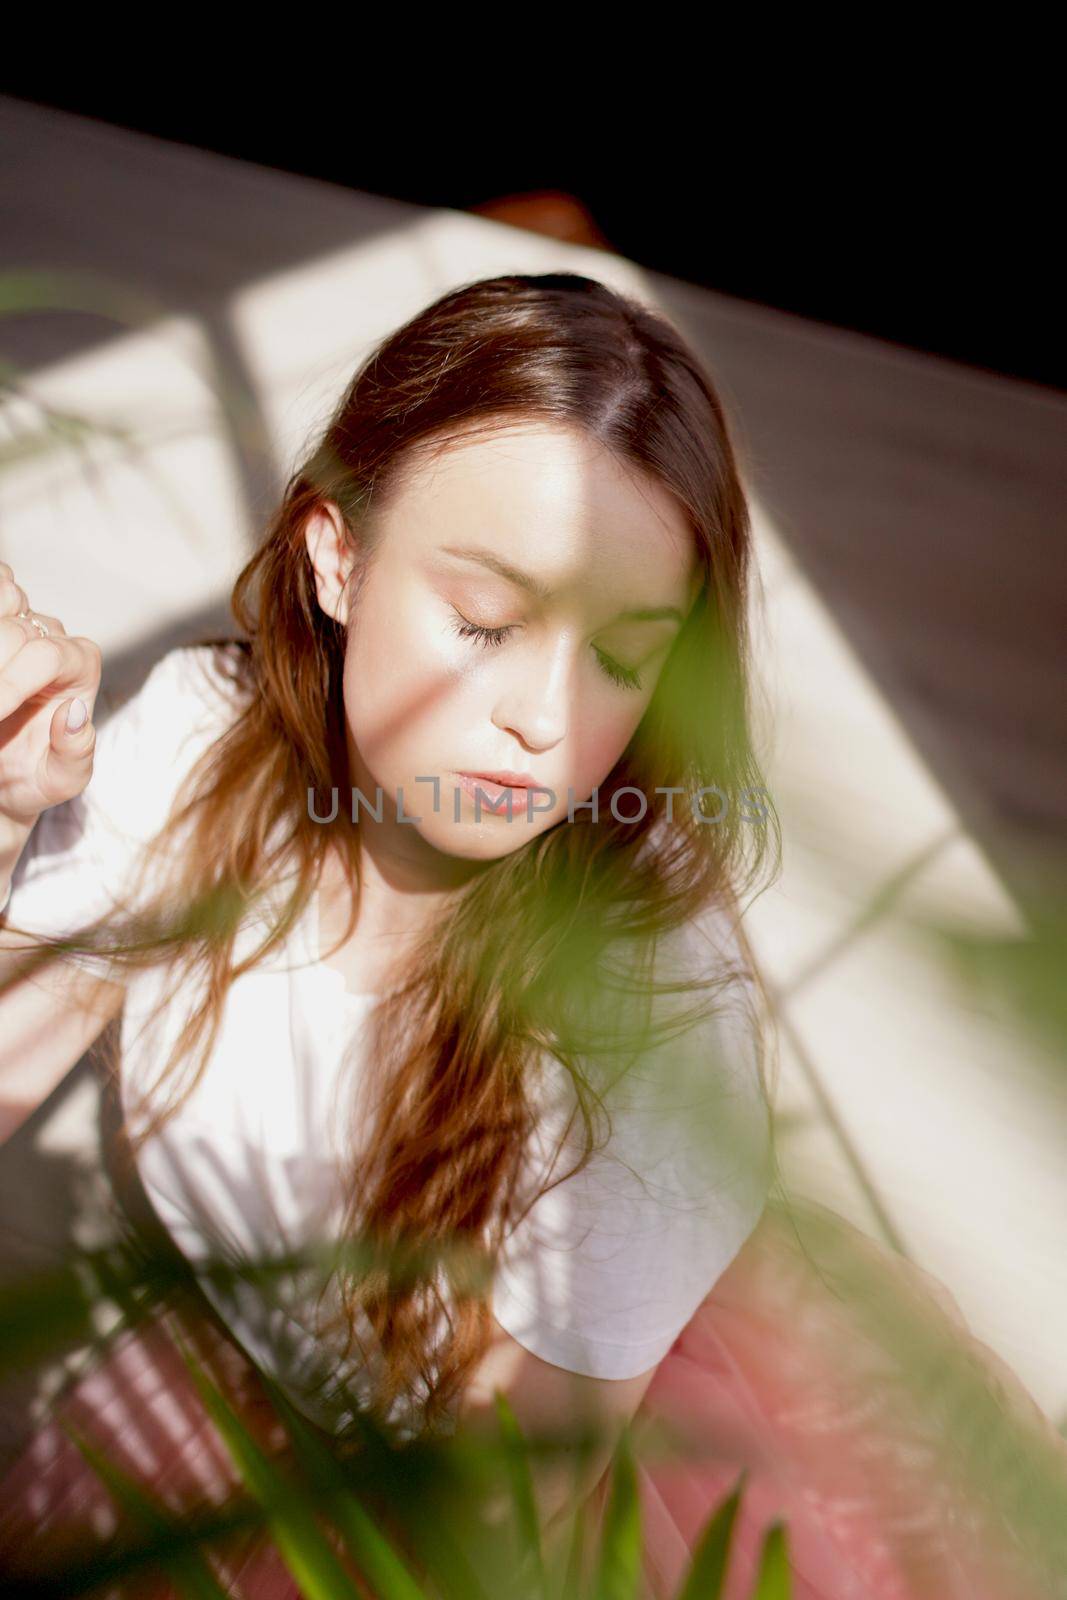 Young beautiful woman with shadows on face - fashion portrait